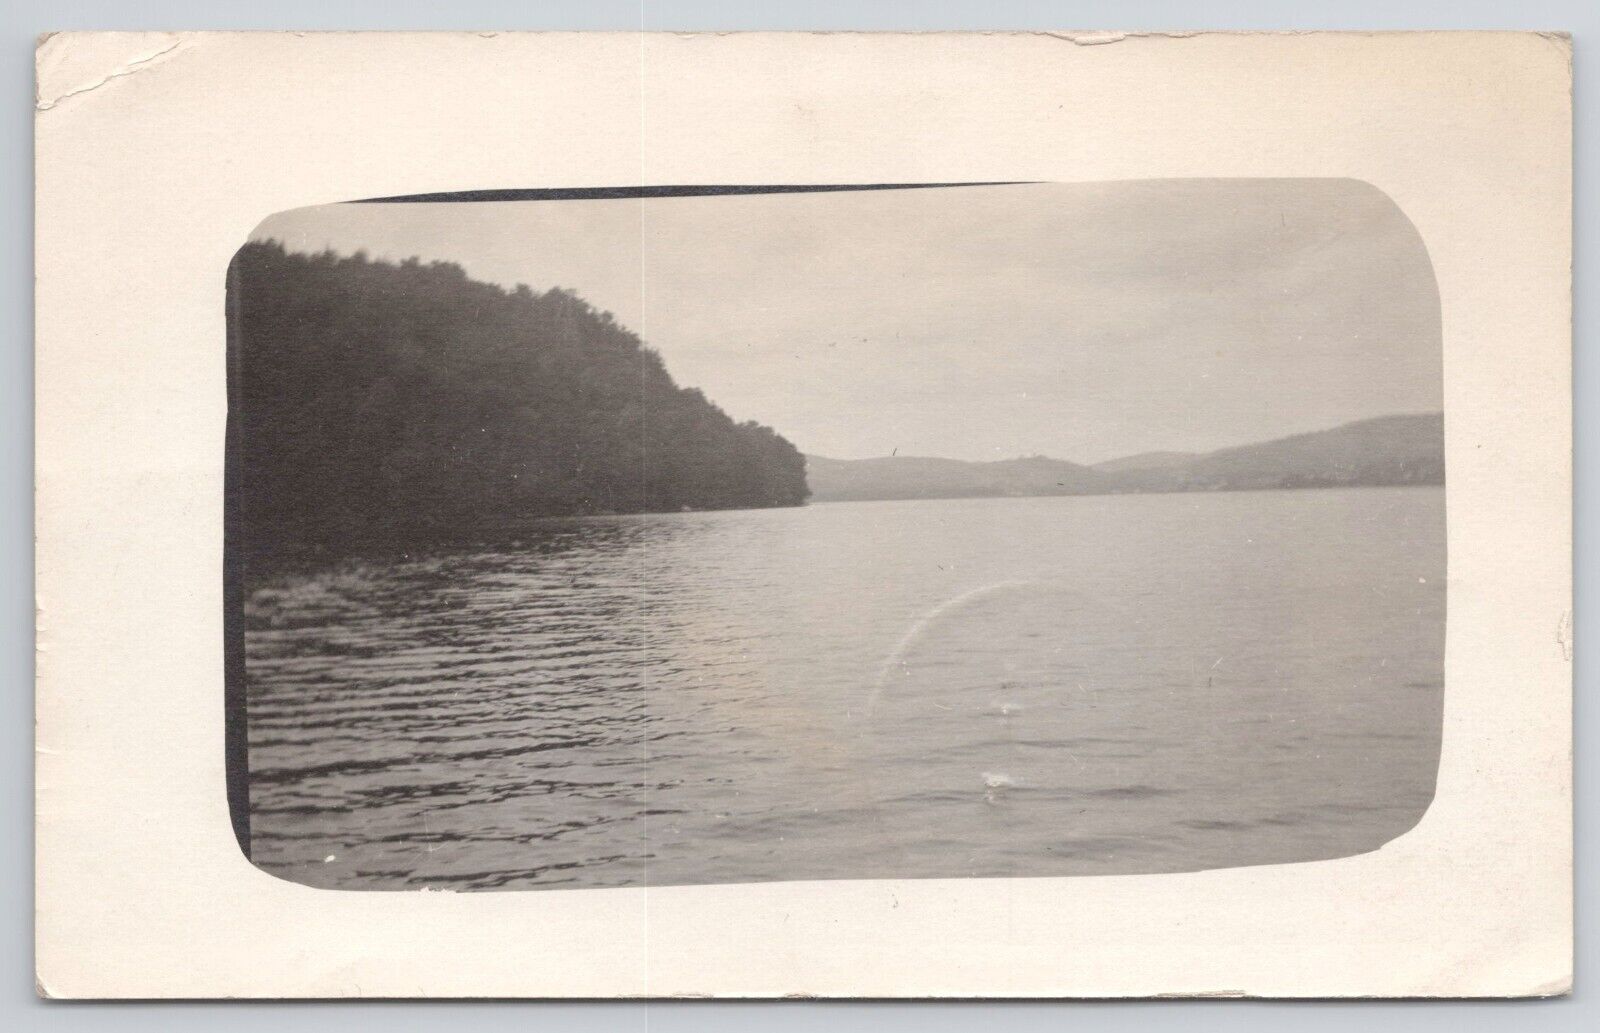 Postcard RPPC Photo of a Lake Taken from a Boat c1912